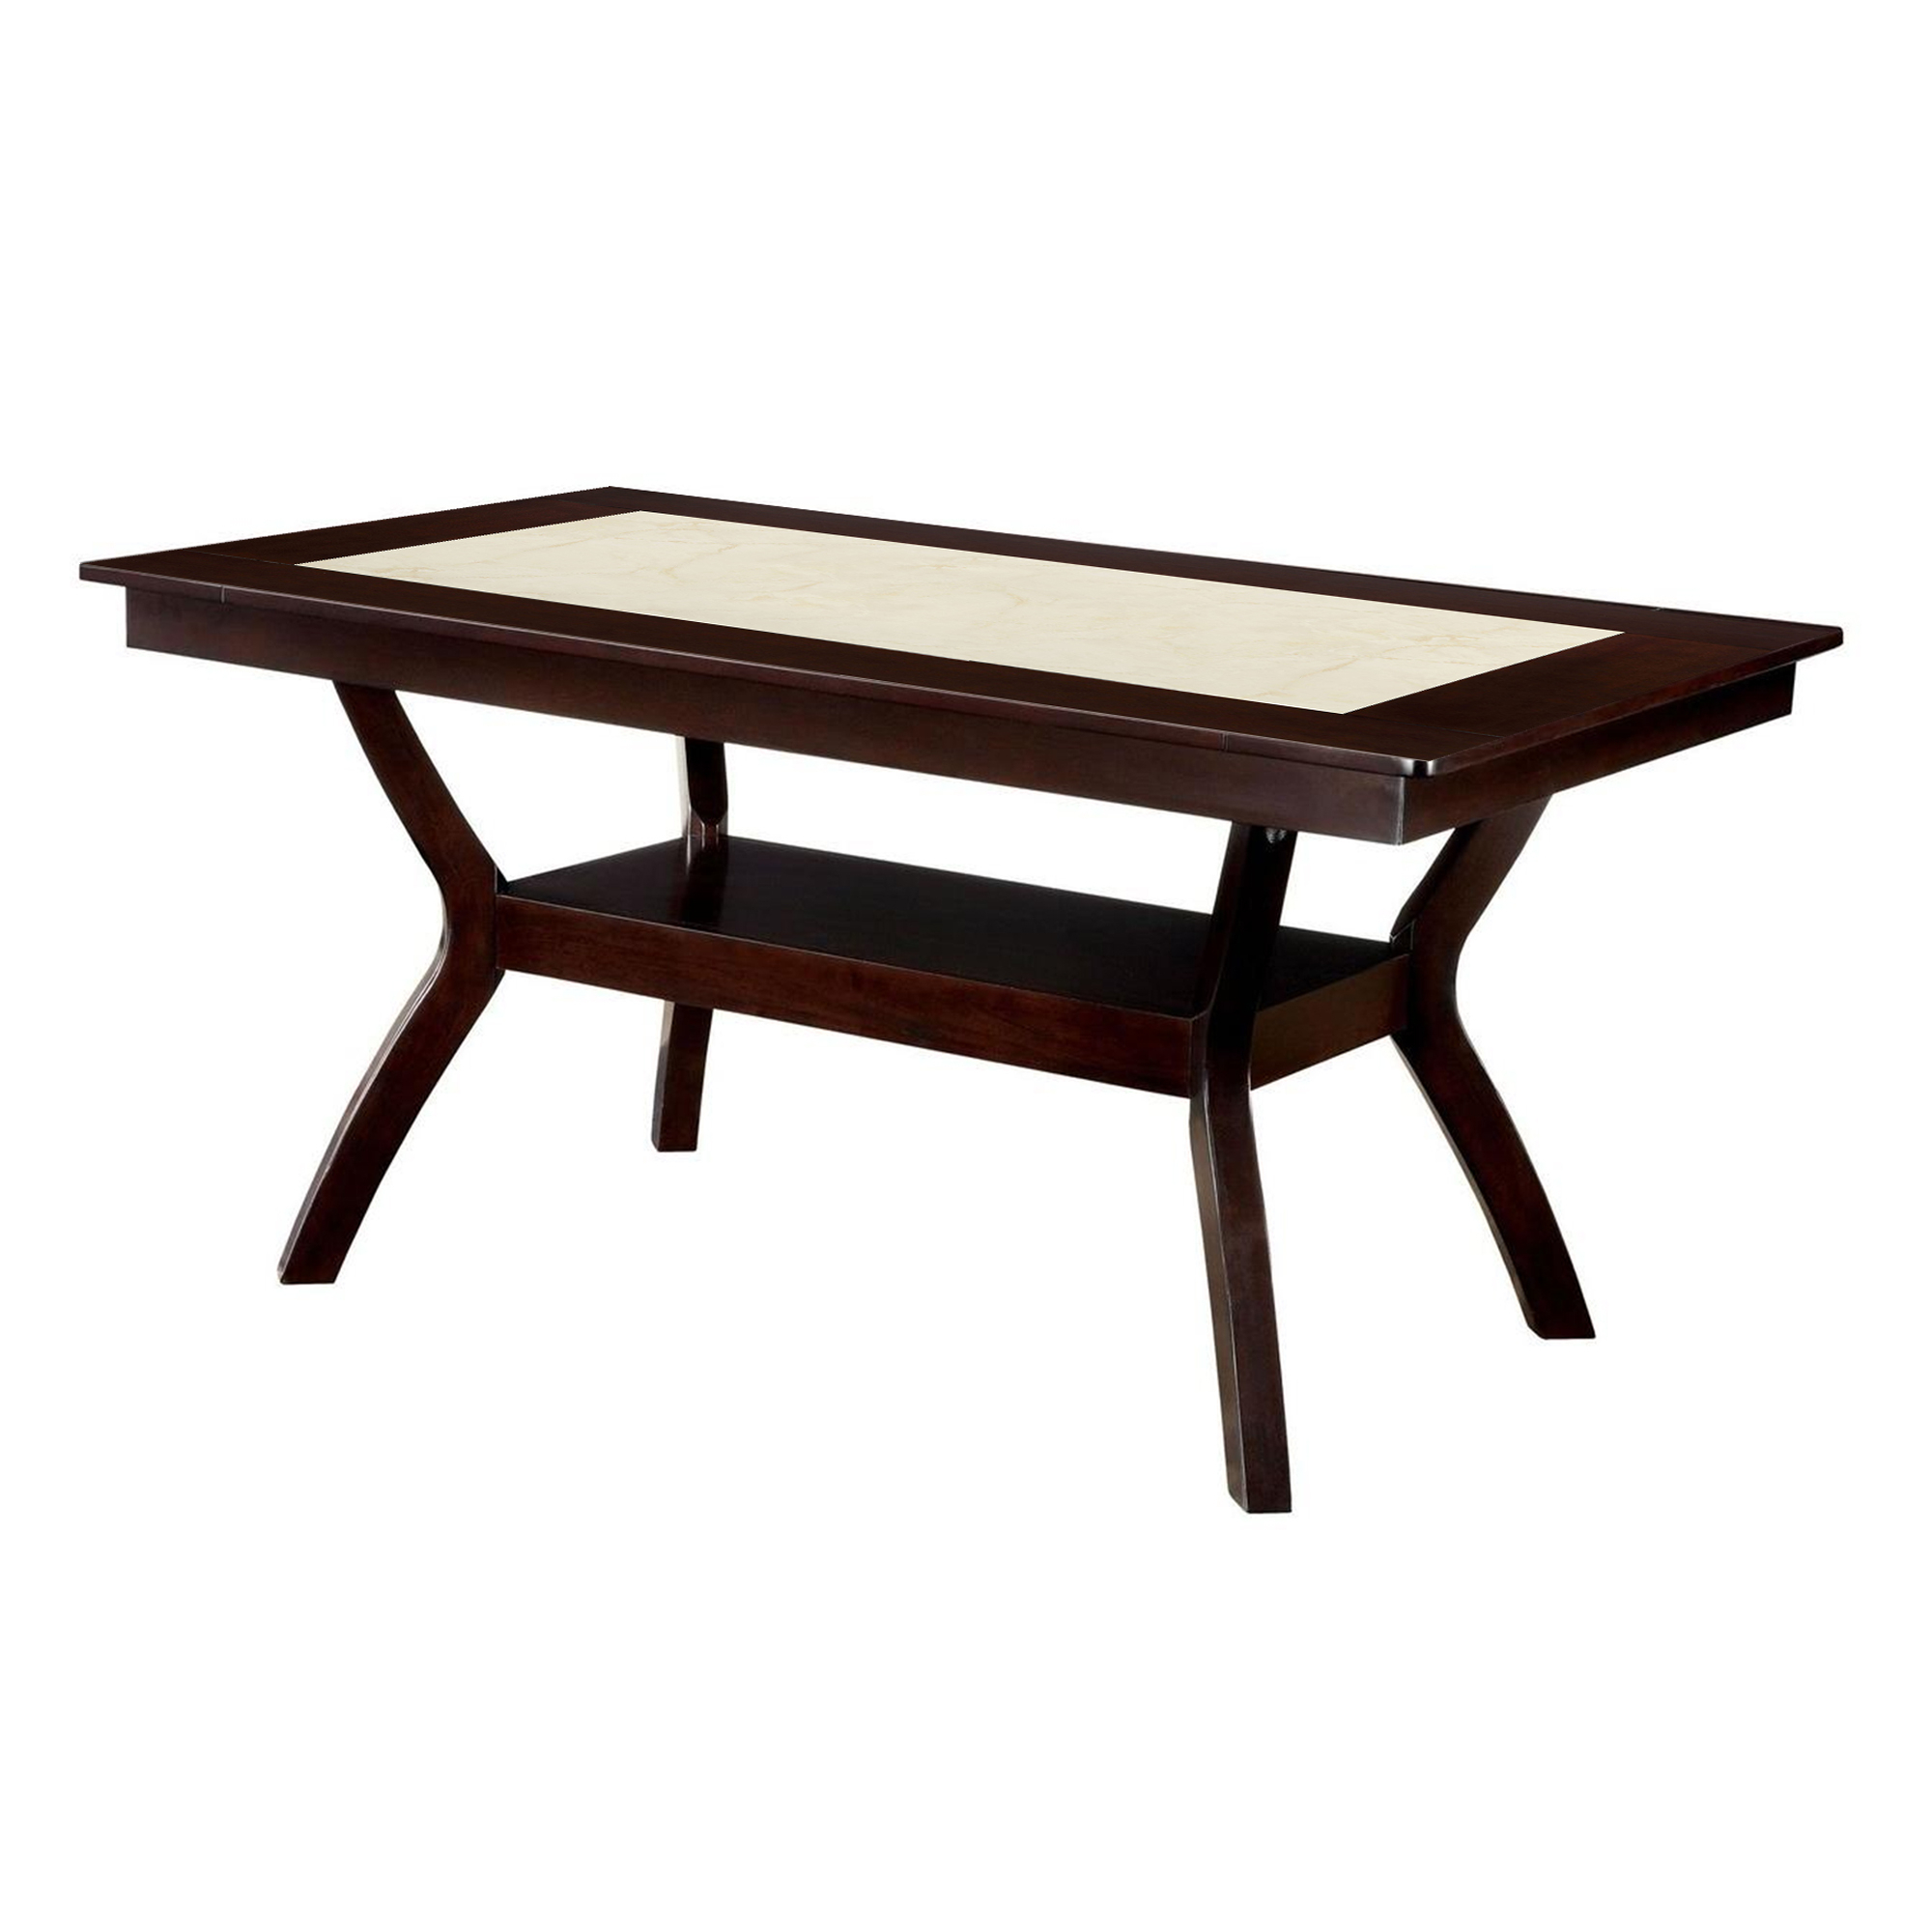 Rectangular Wooden Dining Table With Angled Wooden Legs, Brown And Cream- Saltoro Sherpi